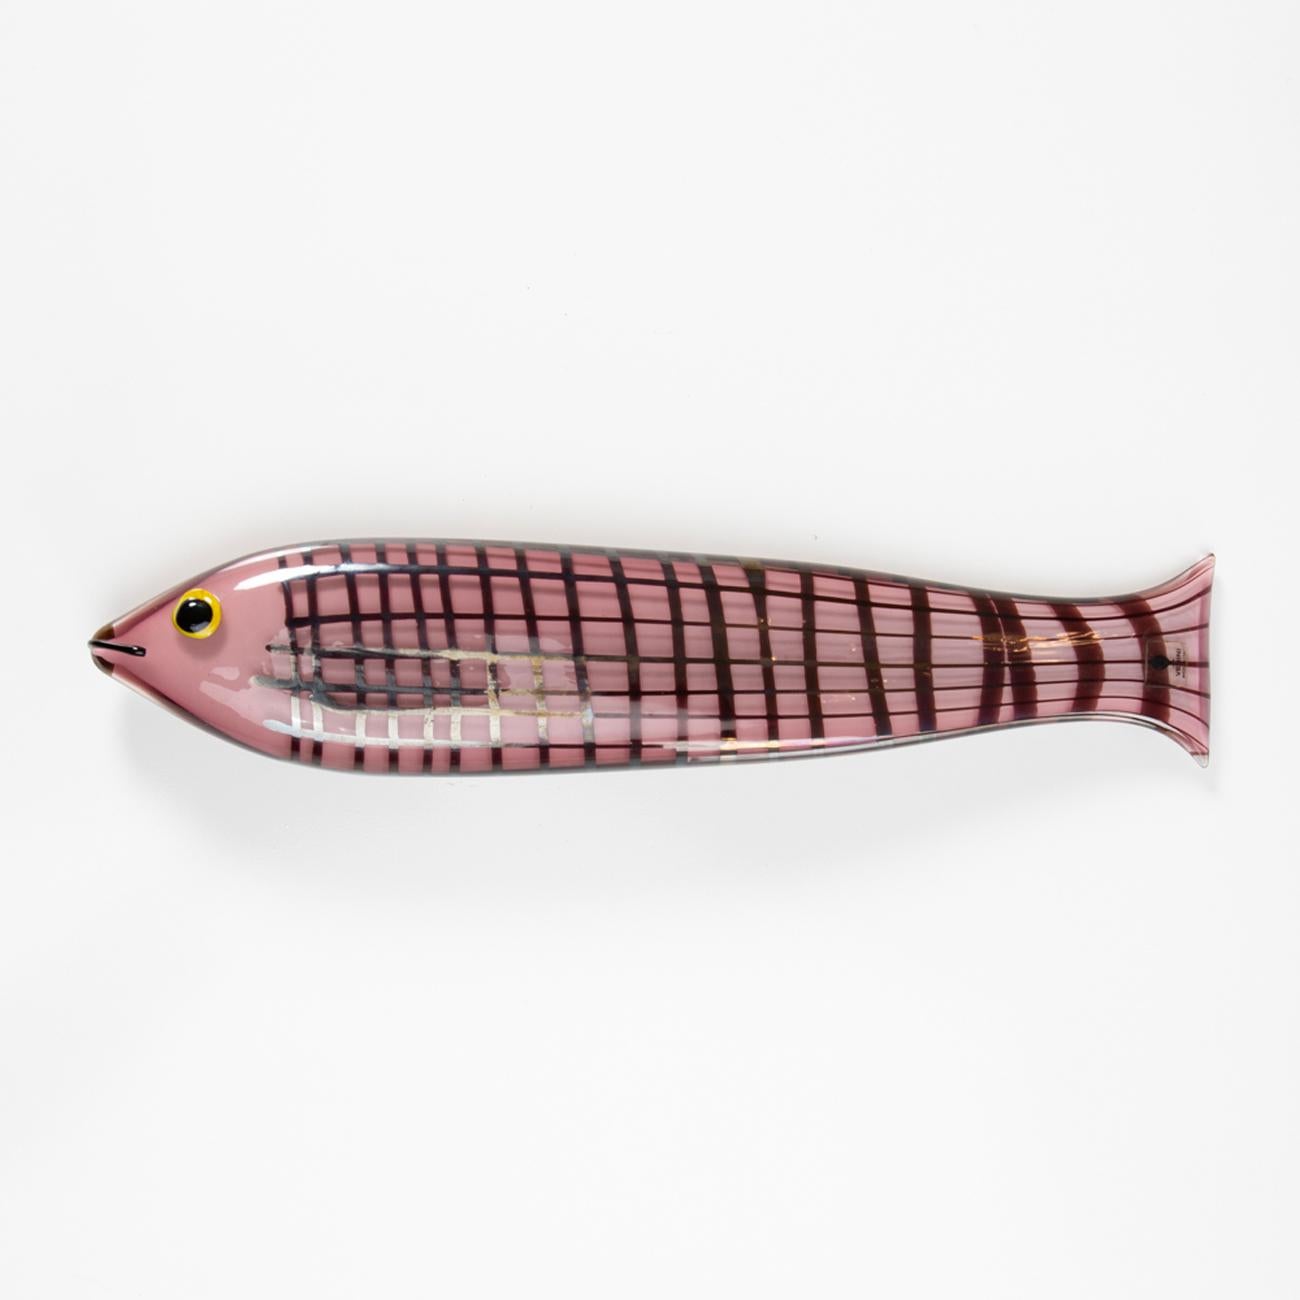 This large fish measures 36 centimeters long in opaque amethyst glass and decorated with a grid of dark amethyst glass. The detail of the black eye on a lemon-yellow background. Ken Scott wanted a slightly iridescent surface for this model.

This